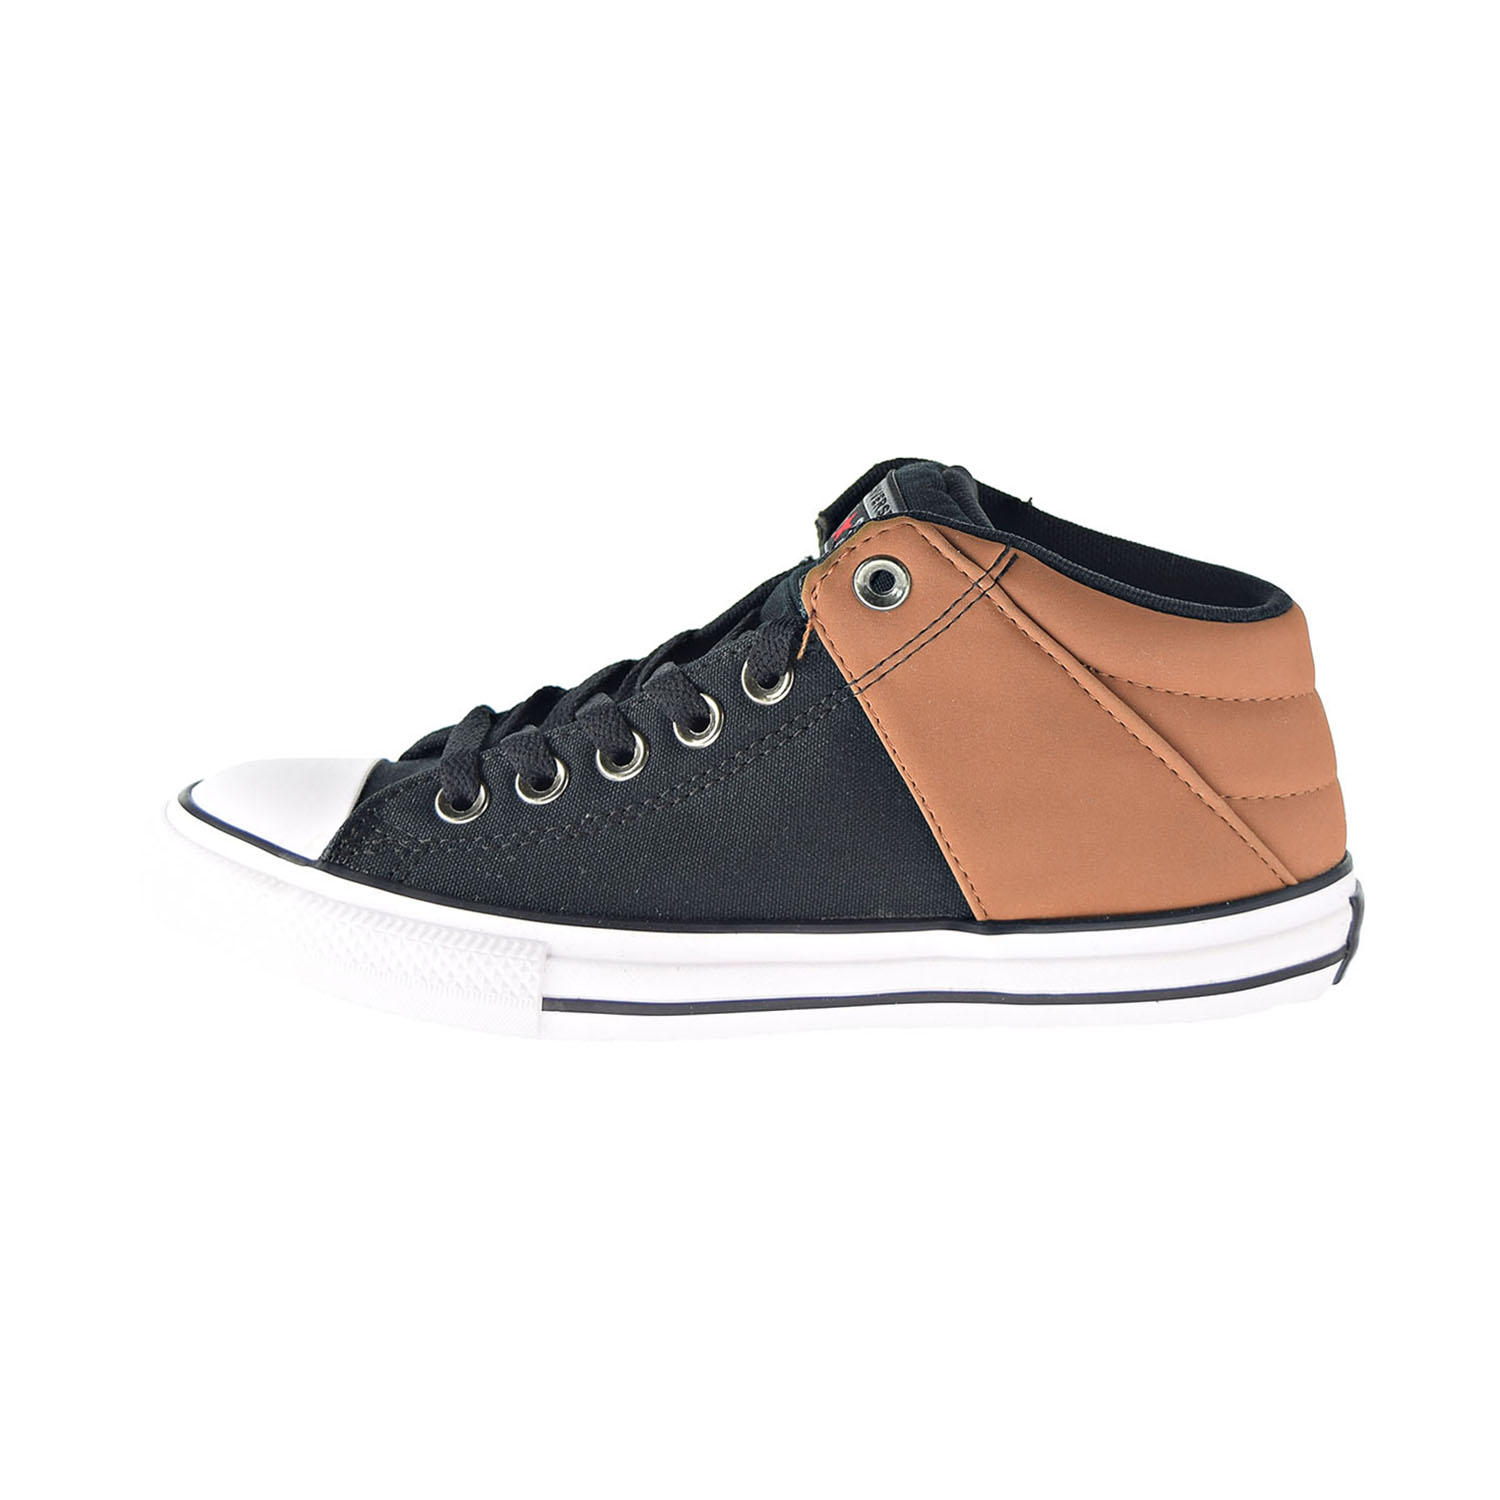 Converse Chuck Taylor All Star Axel Mid Kids' Shoes Black-Warm Tan-White 666065f - image 4 of 6